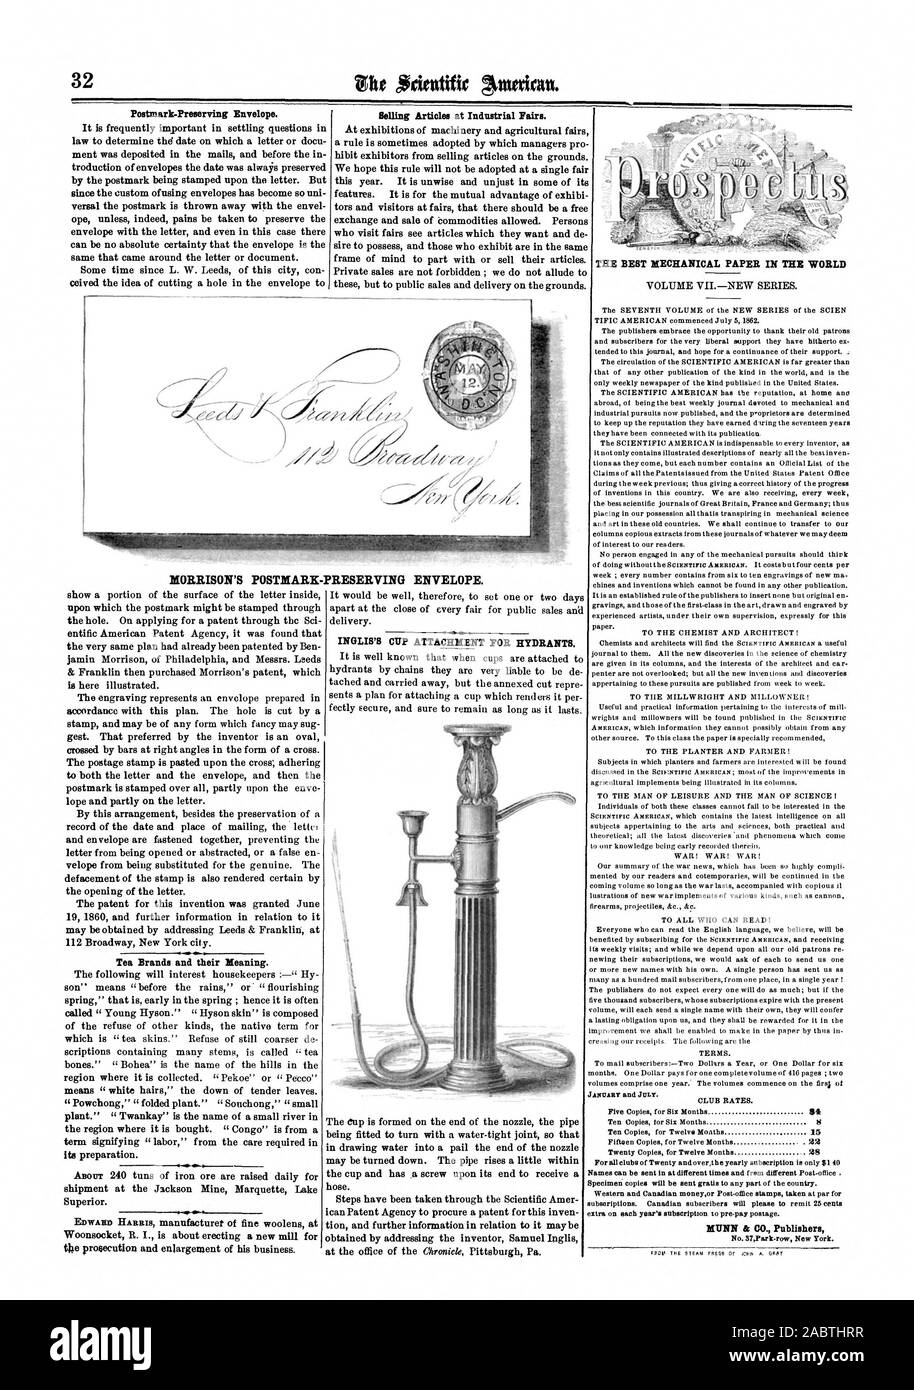 Selling Articles at Industrial Fairs. THE BEST MECHANICAL PAPER IN THE WORLD Postmark-Preserving Envelope. MORRISON'S POSTMARK-PRESERVING ENVELOPE. Tea Brands and their Meaning. INGLIS'S CUP ATTACHMENT FOR HYDRANTS., scientific american, 1862-07-12 Stock Photo